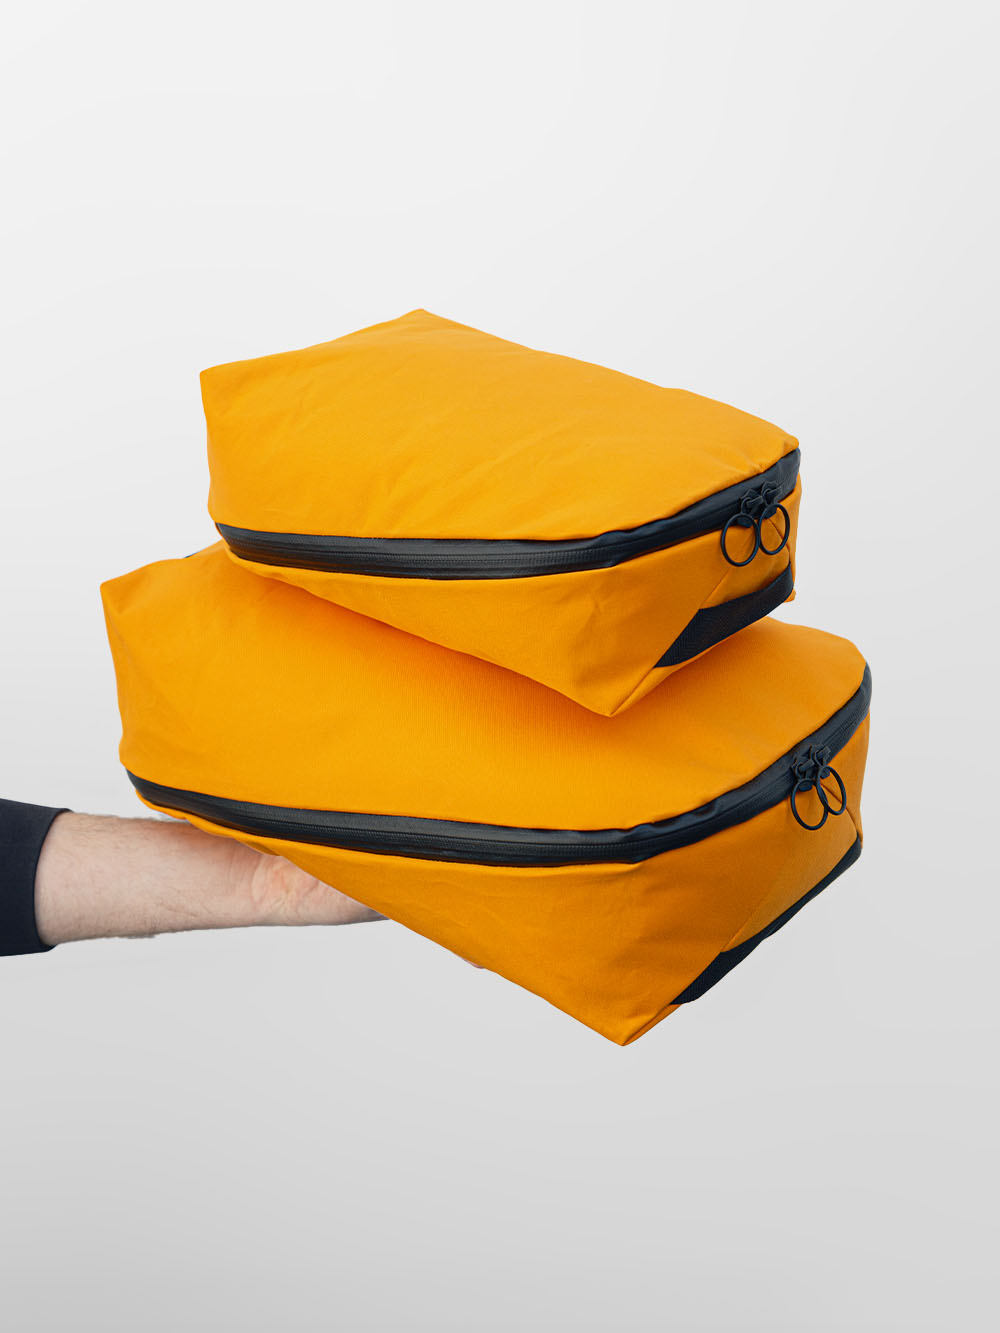 Foulden Clamshell Packing Cubes